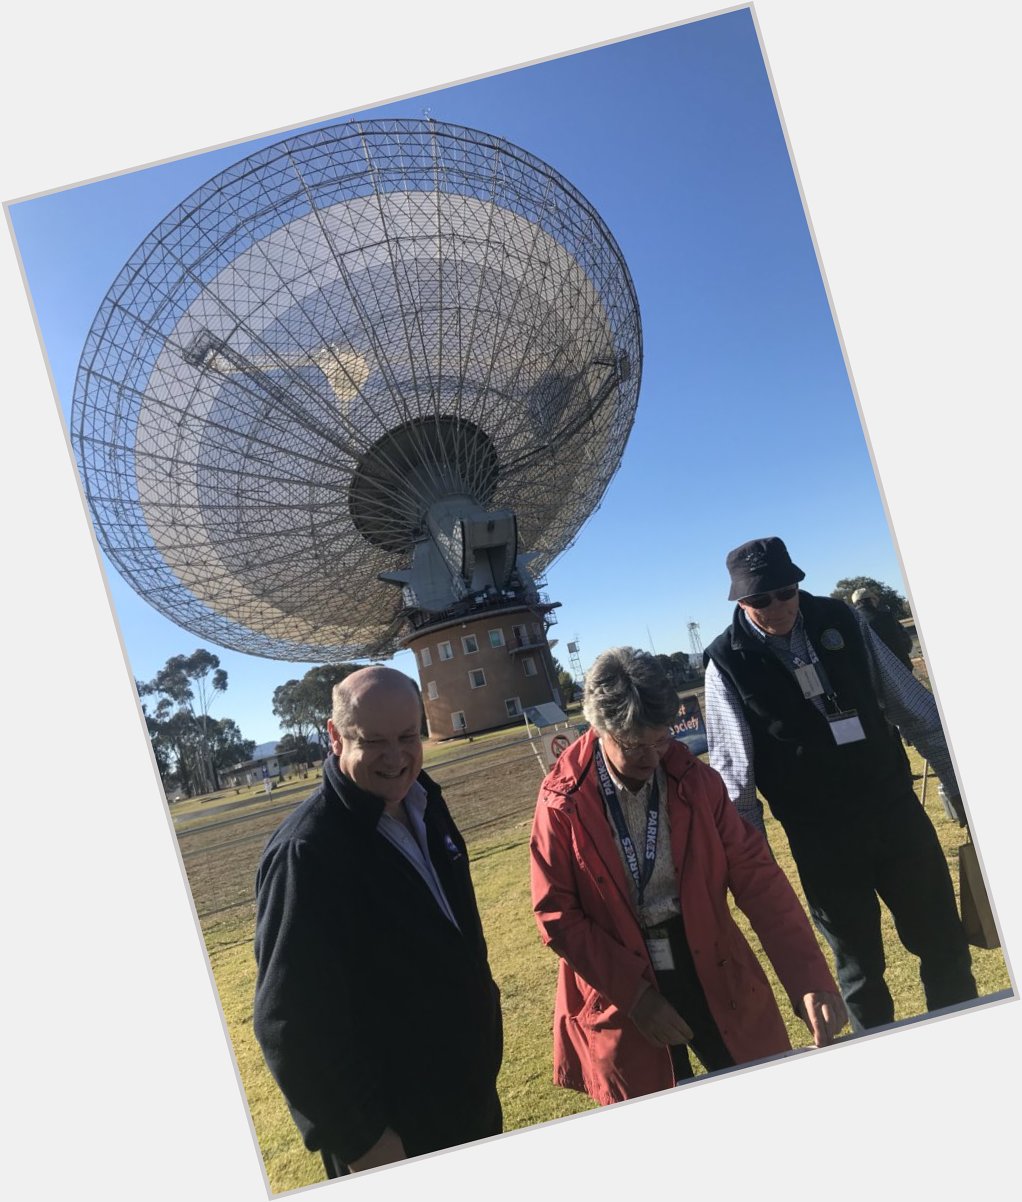 Happy birthday Dame Jocelyn Bell Burnell at the Parkes Dish 